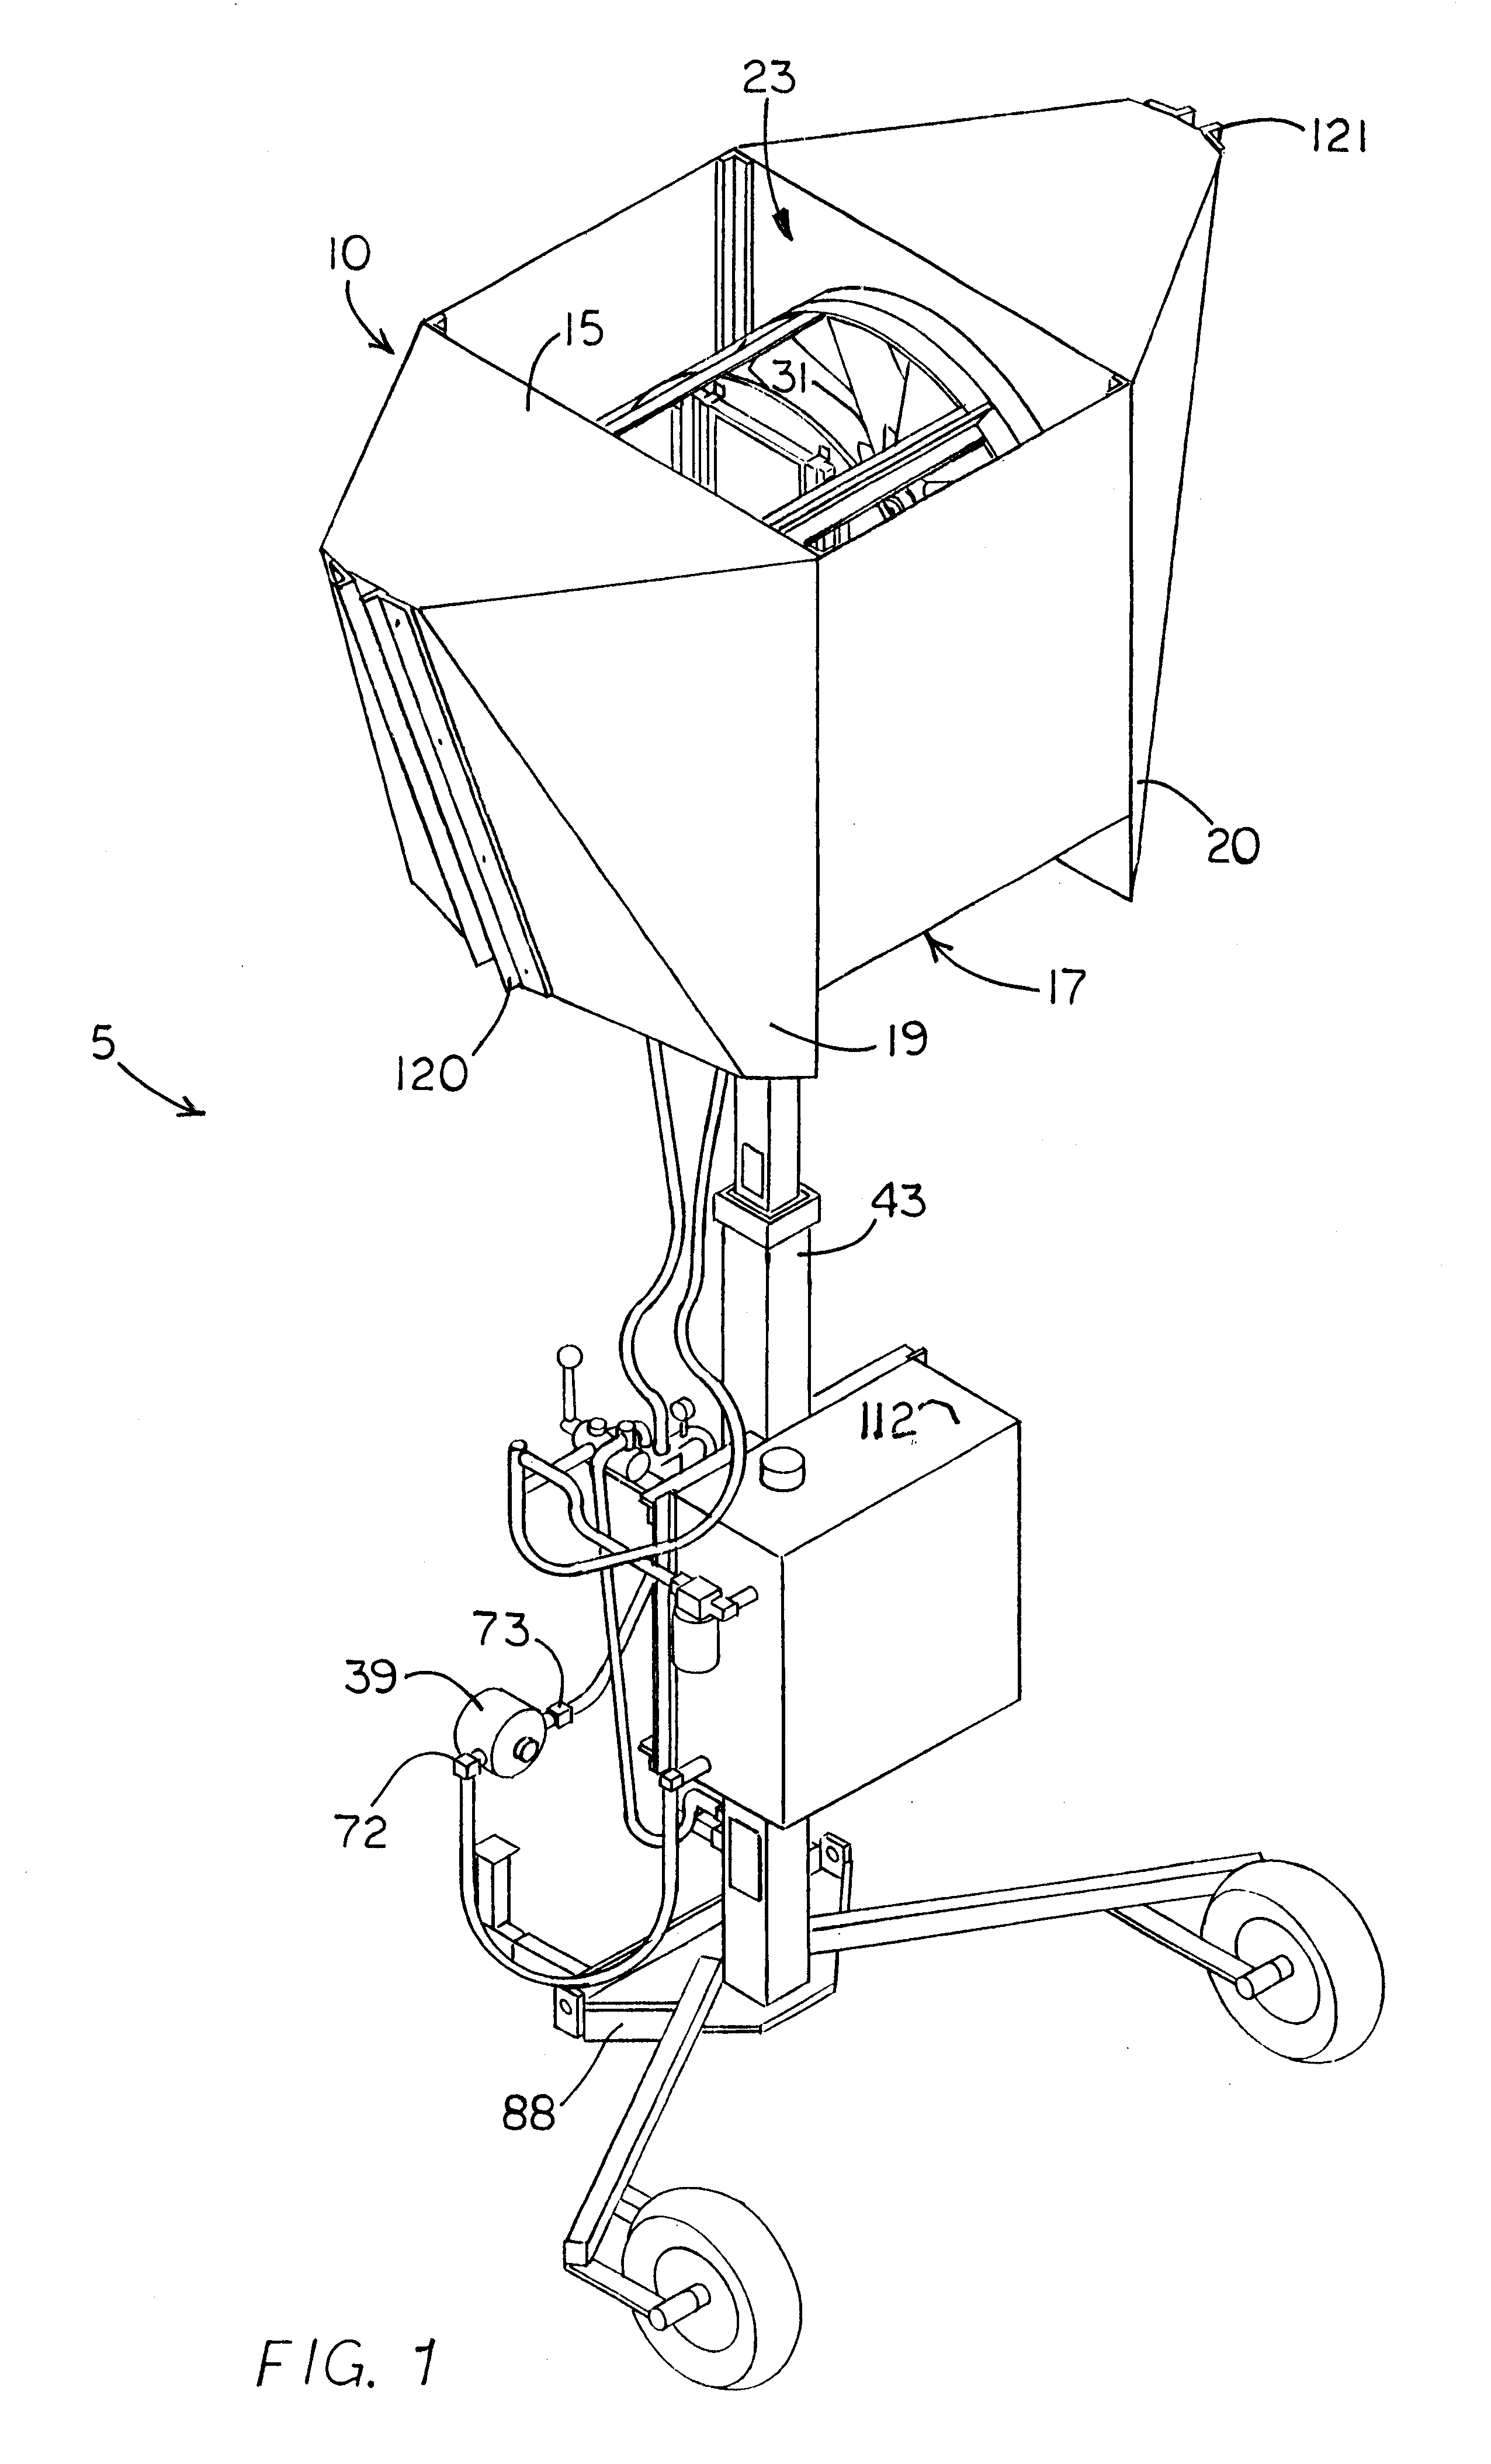 Method and apparatus for an agricultural air handler